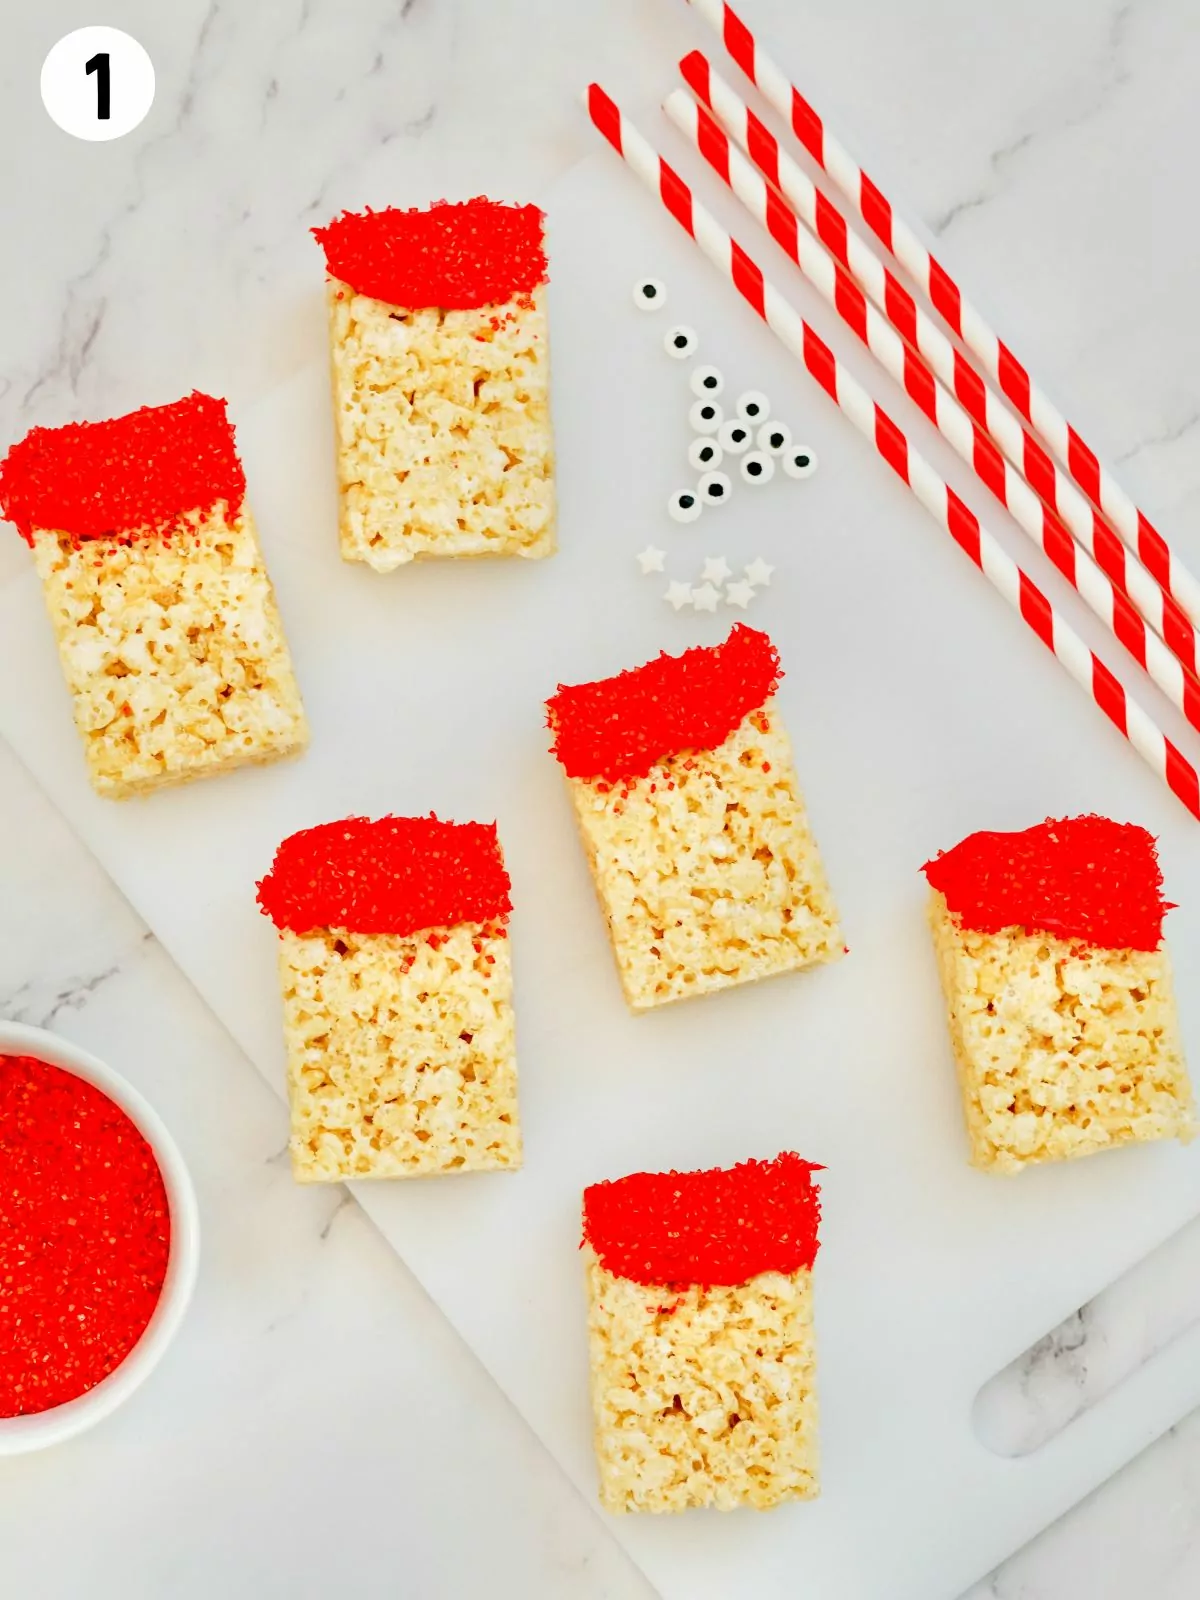 rice krispie treats with red frosting on top.